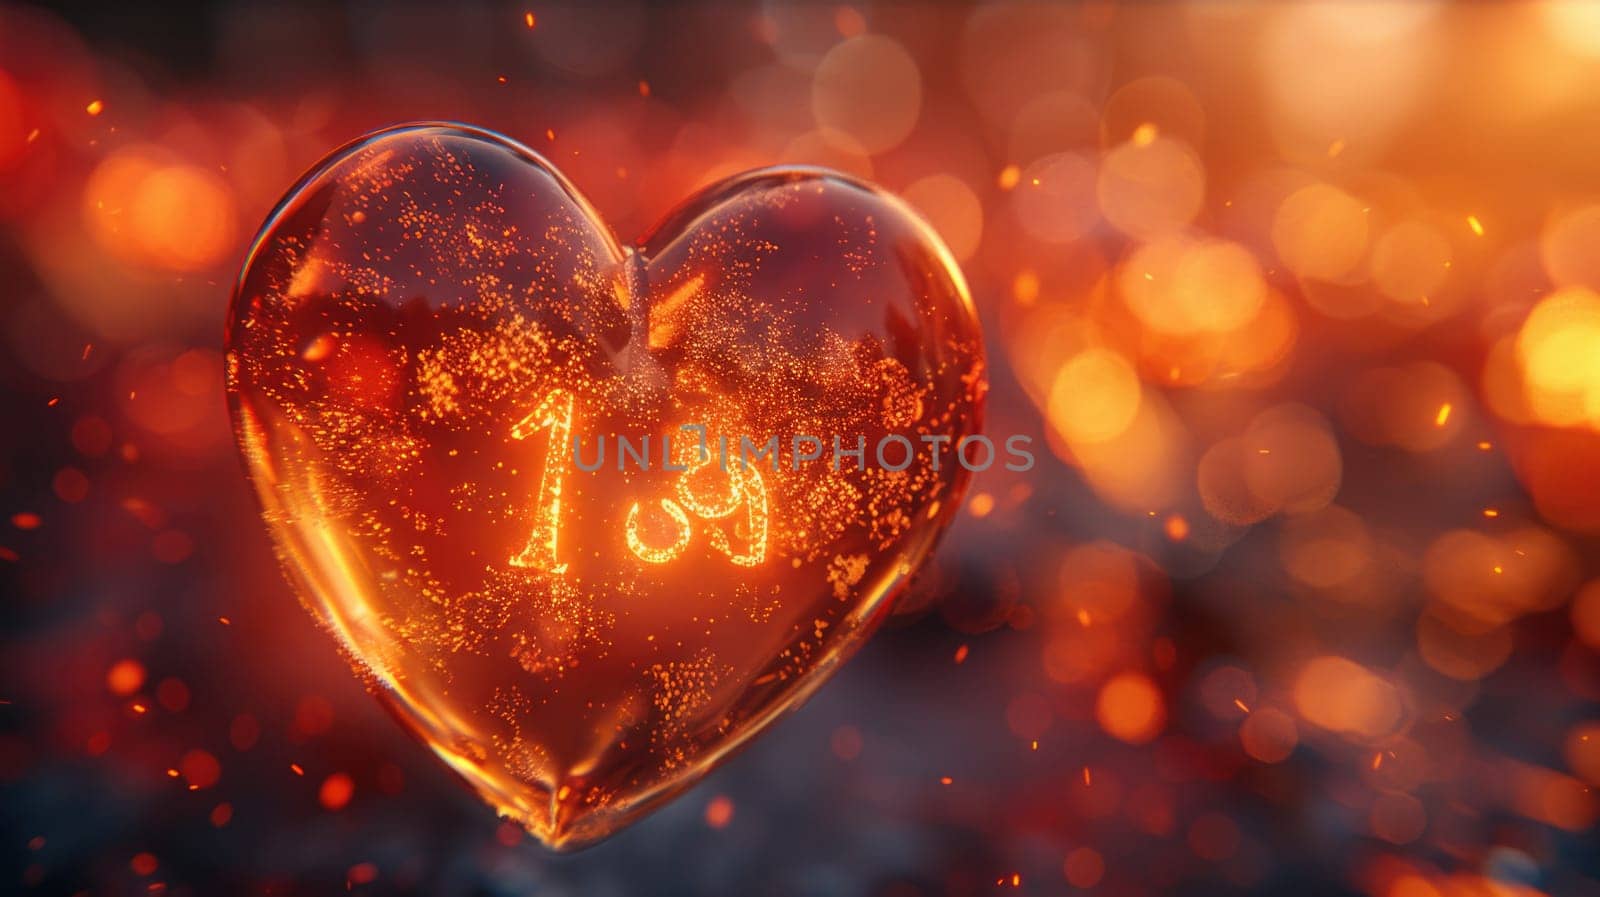 Heart Shaped Balloon With Number Thirteen by but_photo